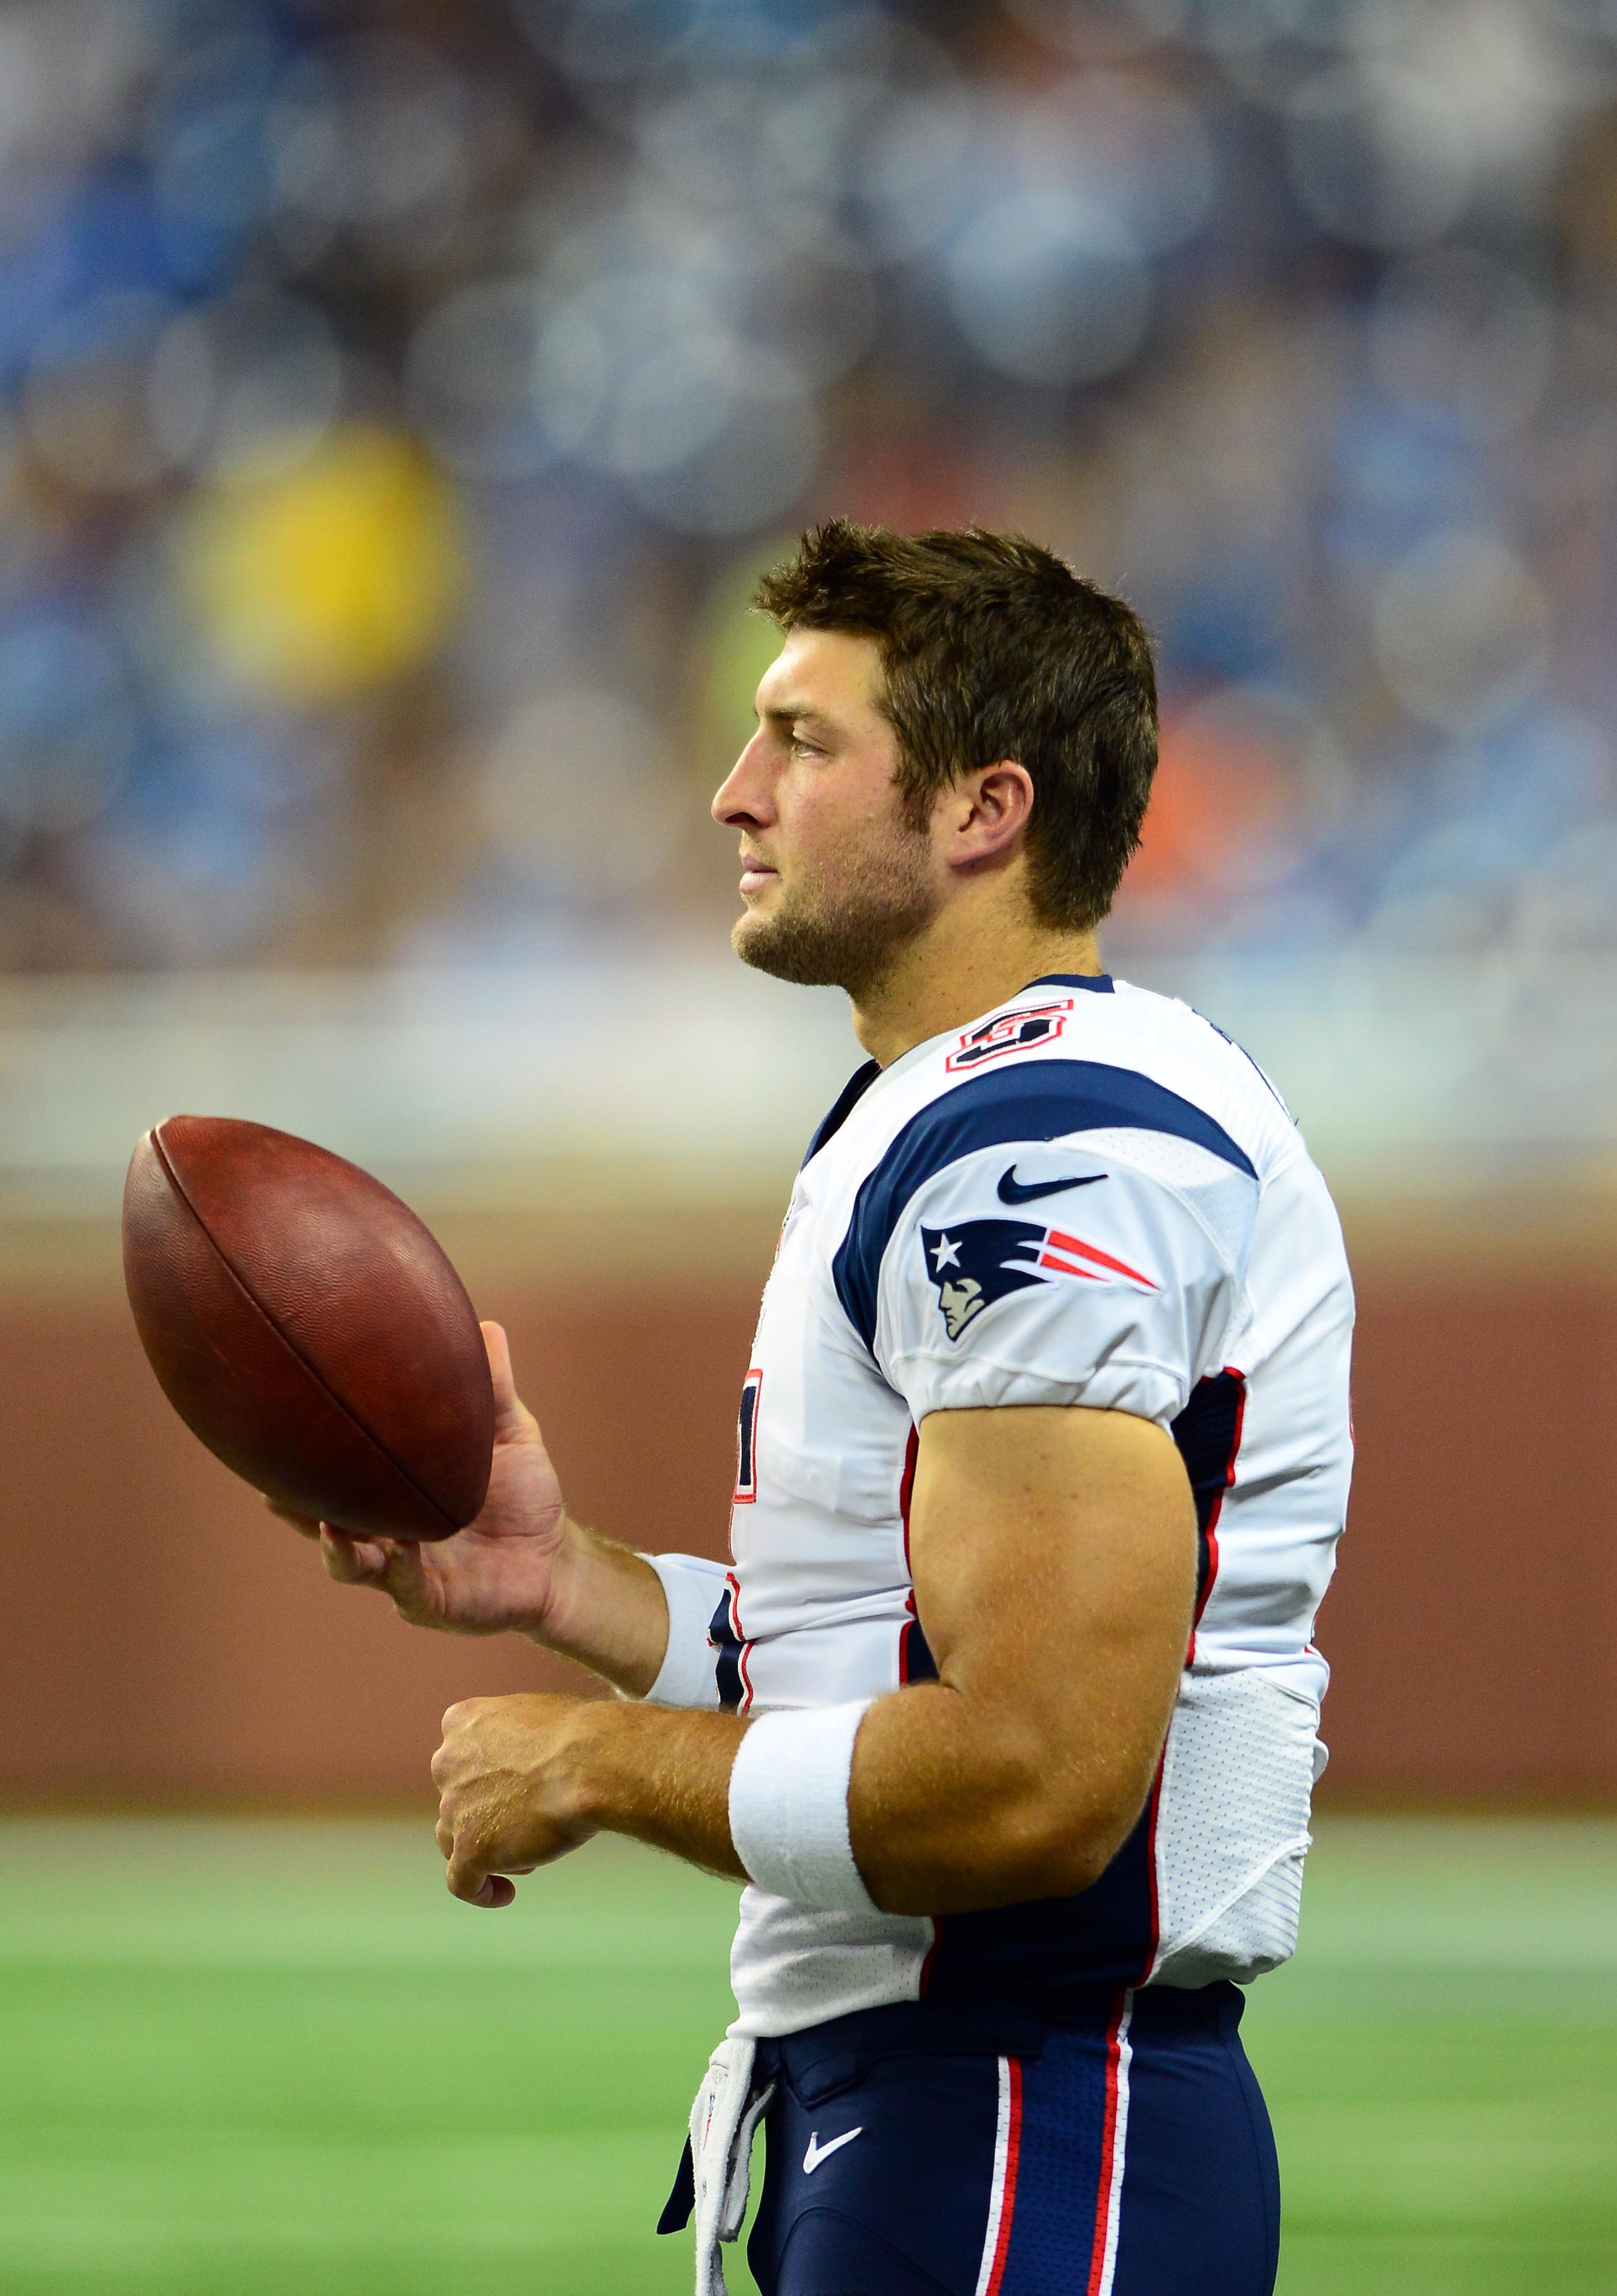 Tim Tebow says he continues to improve